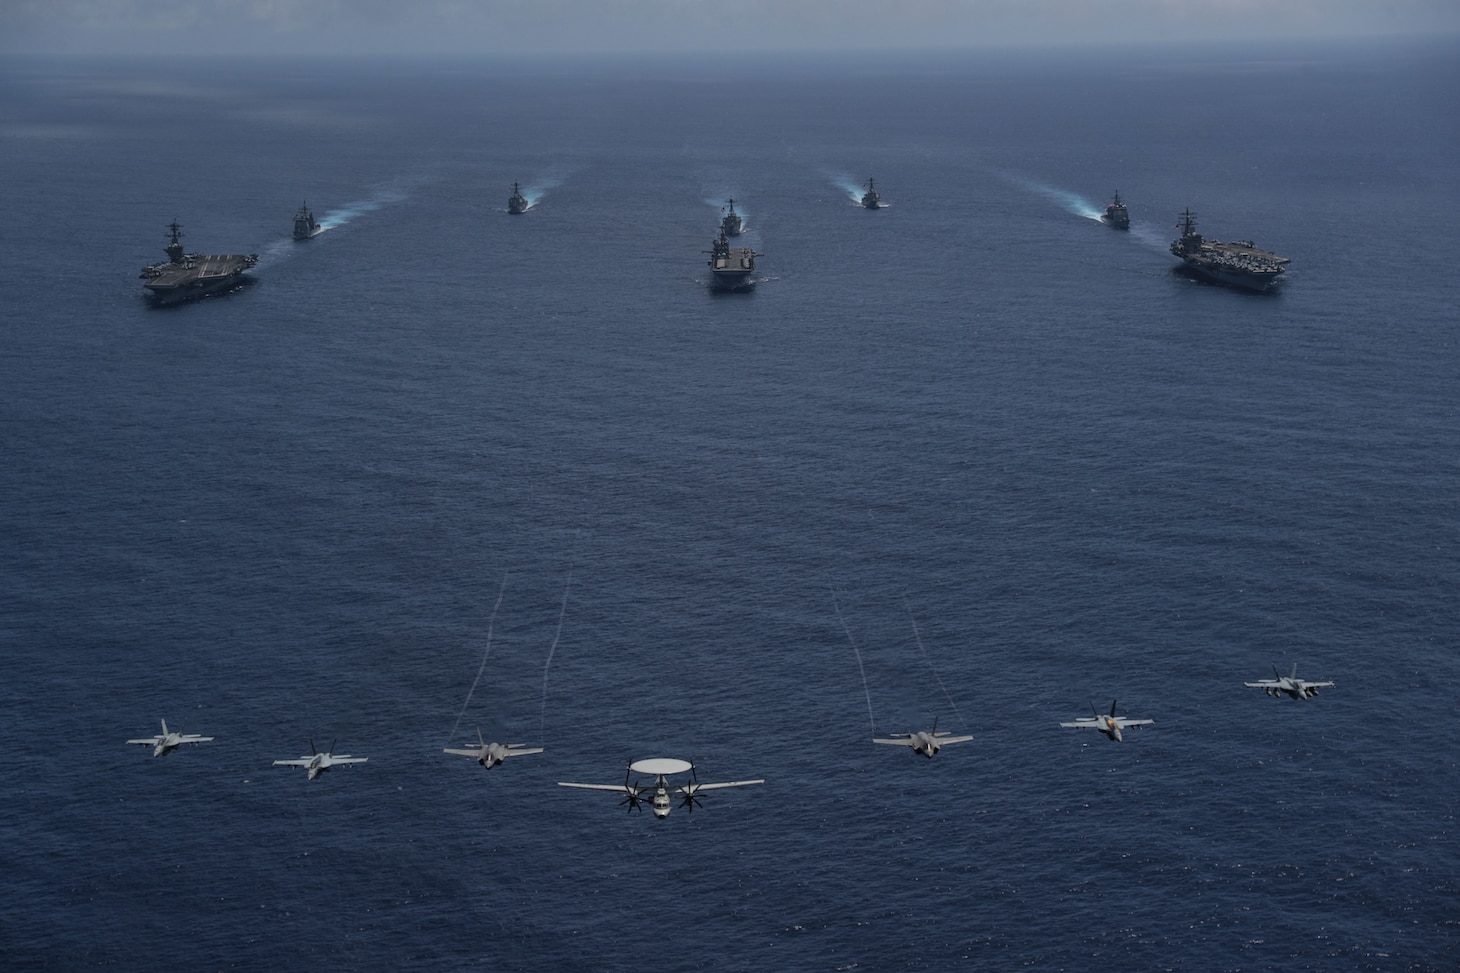 PHILIPPINE SEA (June 12, 2022) Aircraft from Carrier Air Wing (CVW) 9 fly over the Nimitz-class aircraft carrier Abraham Lincoln (CVN 72), front left, America-class amphibious assault ship USS Tripoli (LHA 7), front center, Nimitz-class aircraft carrier USS Ronald Reagan (CVN 76), front right, Ticonderoga-class guided-missile cruiser USS Mobile Bay (CG 53), middle left, Arleigh Burke-class guided-missile destroyer USS Benfold (DDG 65), middle center, Ticonderoga-class guided-missile cruiser USS Antietam (CG 54), middle right, Arleigh Burke-class guided-missile destroyer USS Spruance (DDG 111), back left, and Arleigh Burke-class guided-missile destroyer USS Fitzgerald (DDG 62), back right, as they sail in formation during Valiant Shield 2022 (VS22). VS22 is a U.S.-only, biennial field training exercise (FTX) focused on integration of joint training in a multi-domain environment. This training builds real-world proficiency in sustaining joint forces through detecting, locating, tracking, and engaging units at sea, in the air, on land, and in cyberspace in response to a range of mission areas. (U.S. Navy photo by Mass Communication Specialist 3rd Class Thaddeus Berry)